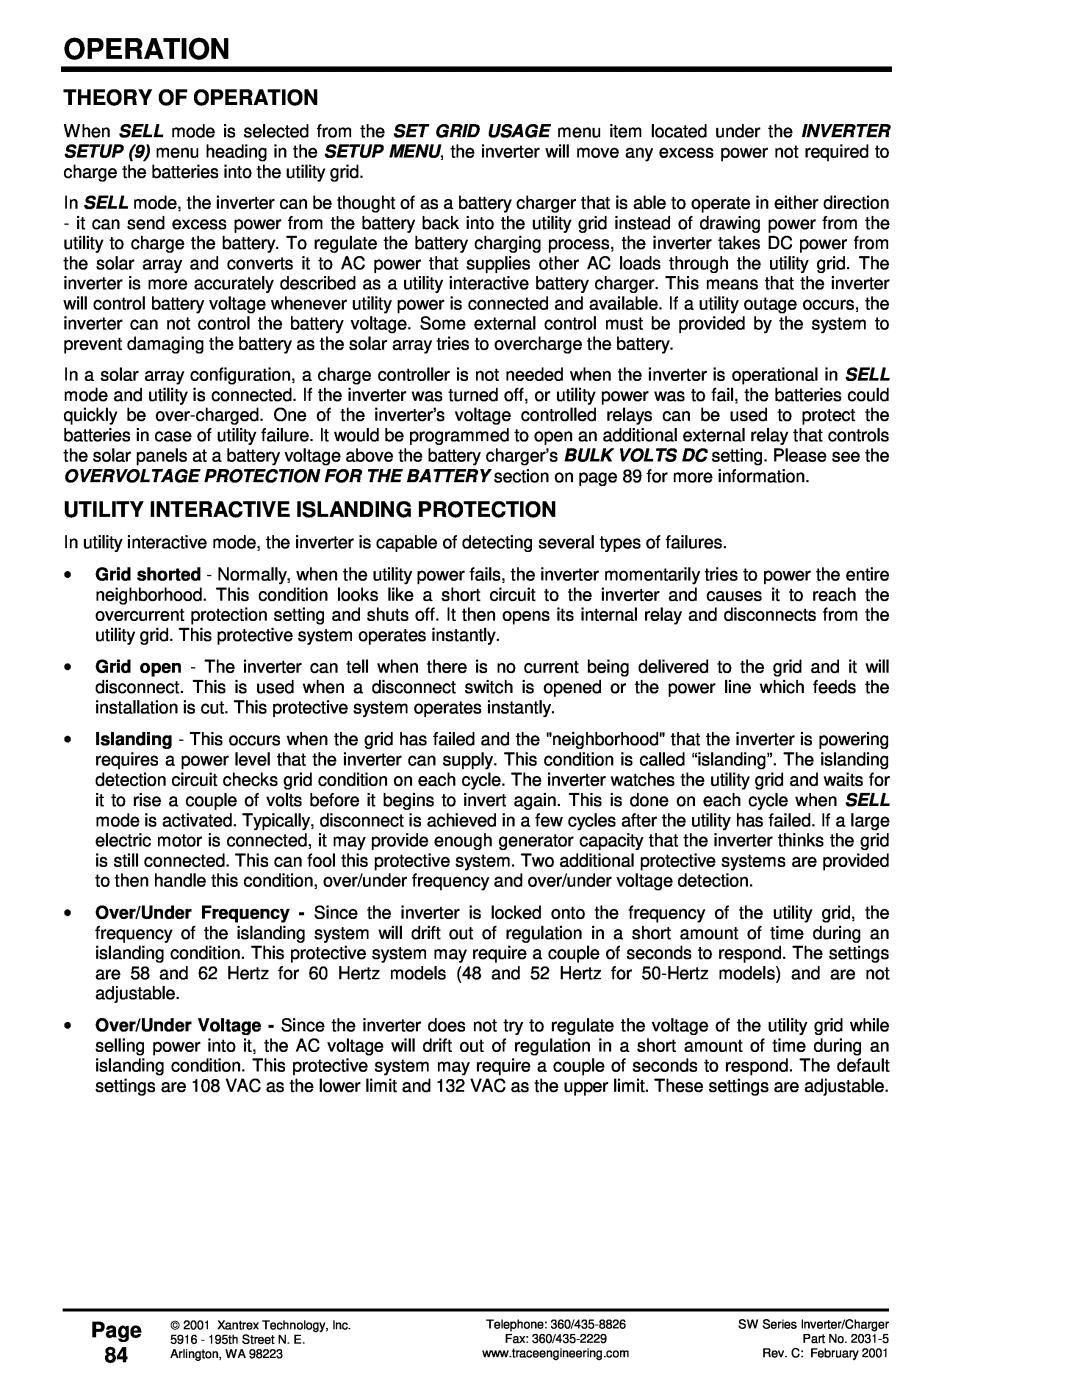 Xantrex Technology SW Series owner manual Theory Of Operation, Utility Interactive Islanding Protection, Page 84 